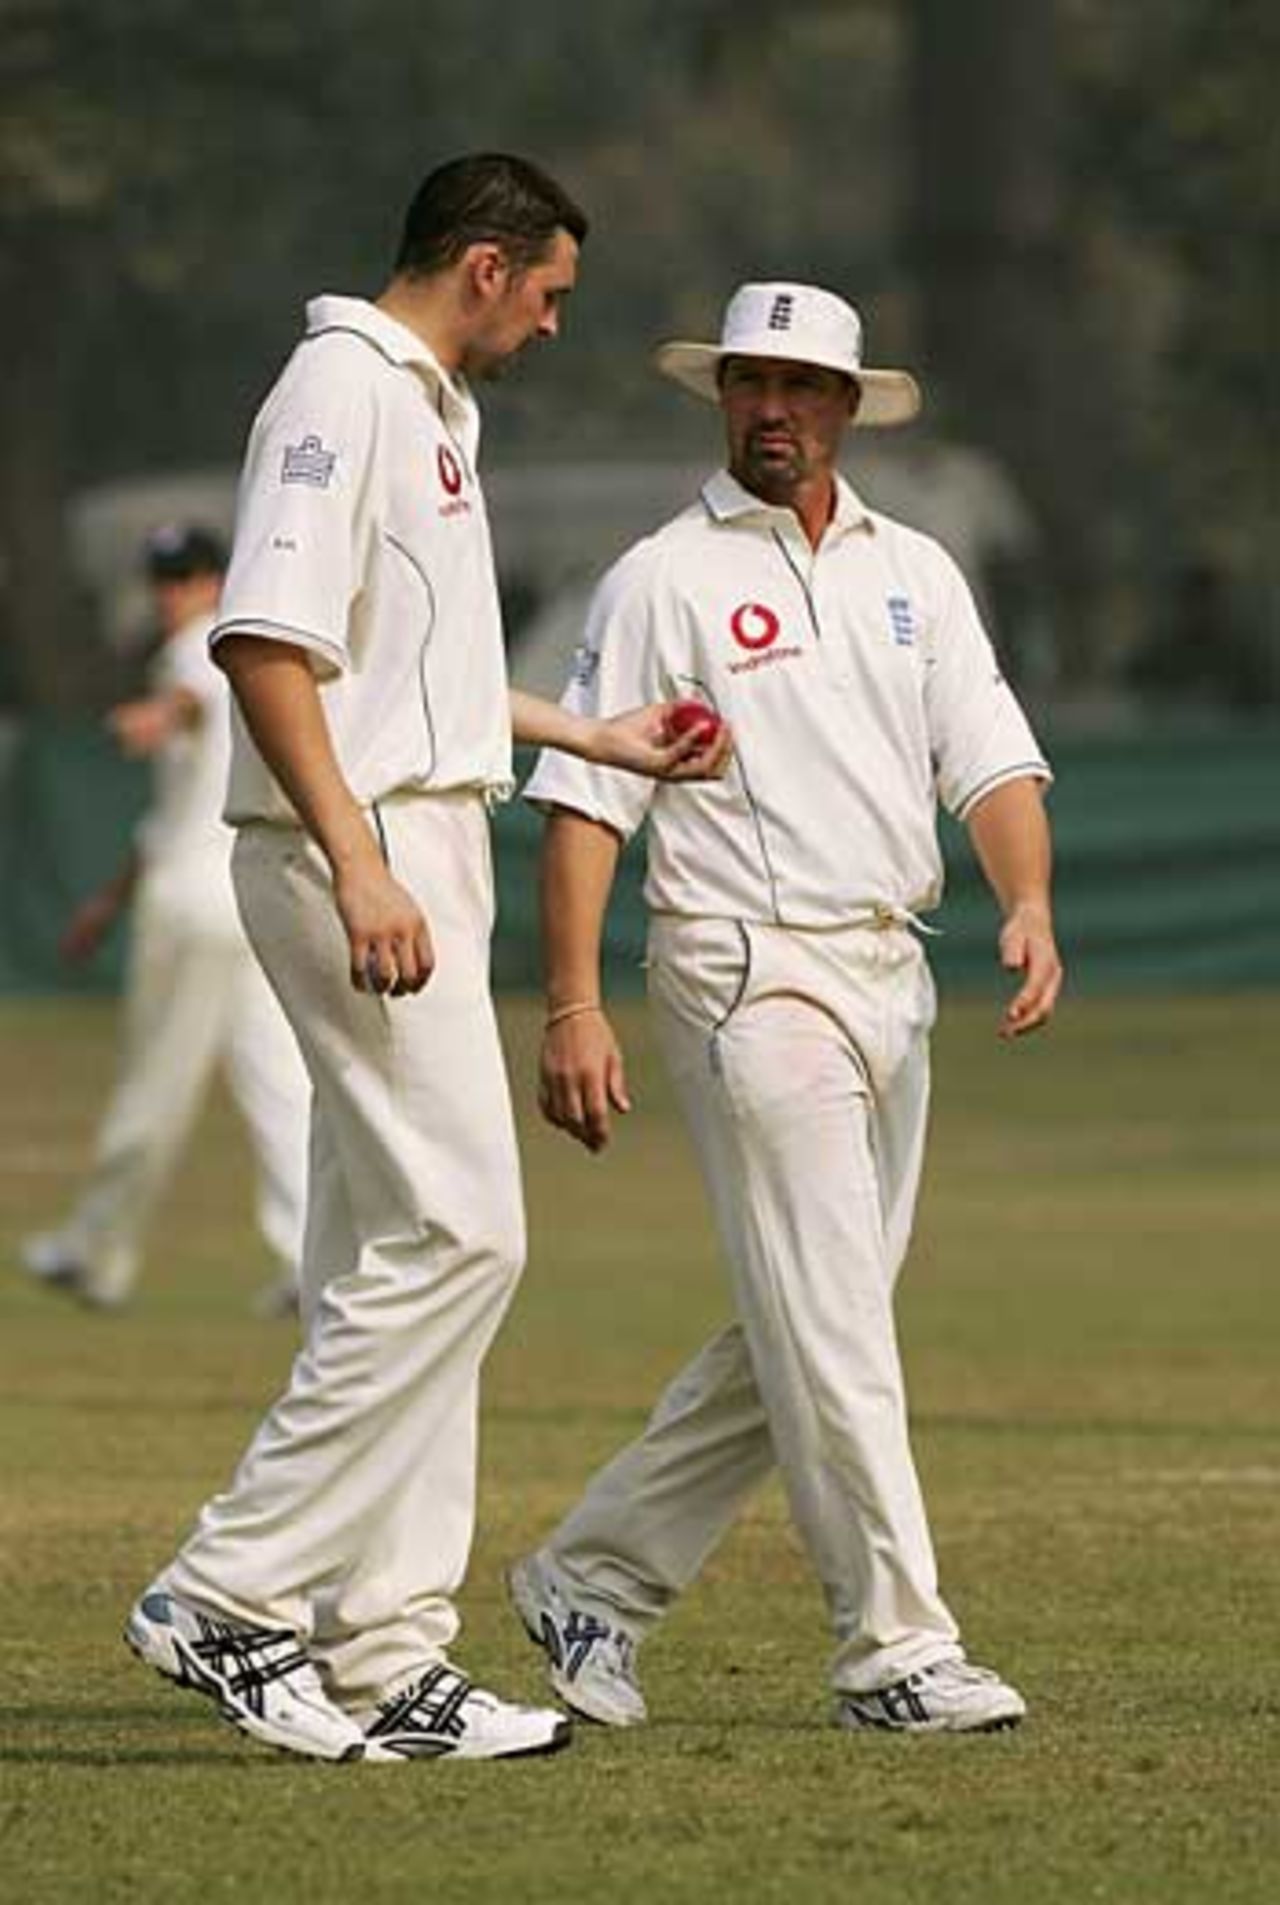 Matthew Maynard, who was forced into action as a sub fielder, talks to Steve Harmison as England slip to defeat, Pakistan A v England XI, Tour Match, Lahore, November 8, 2005